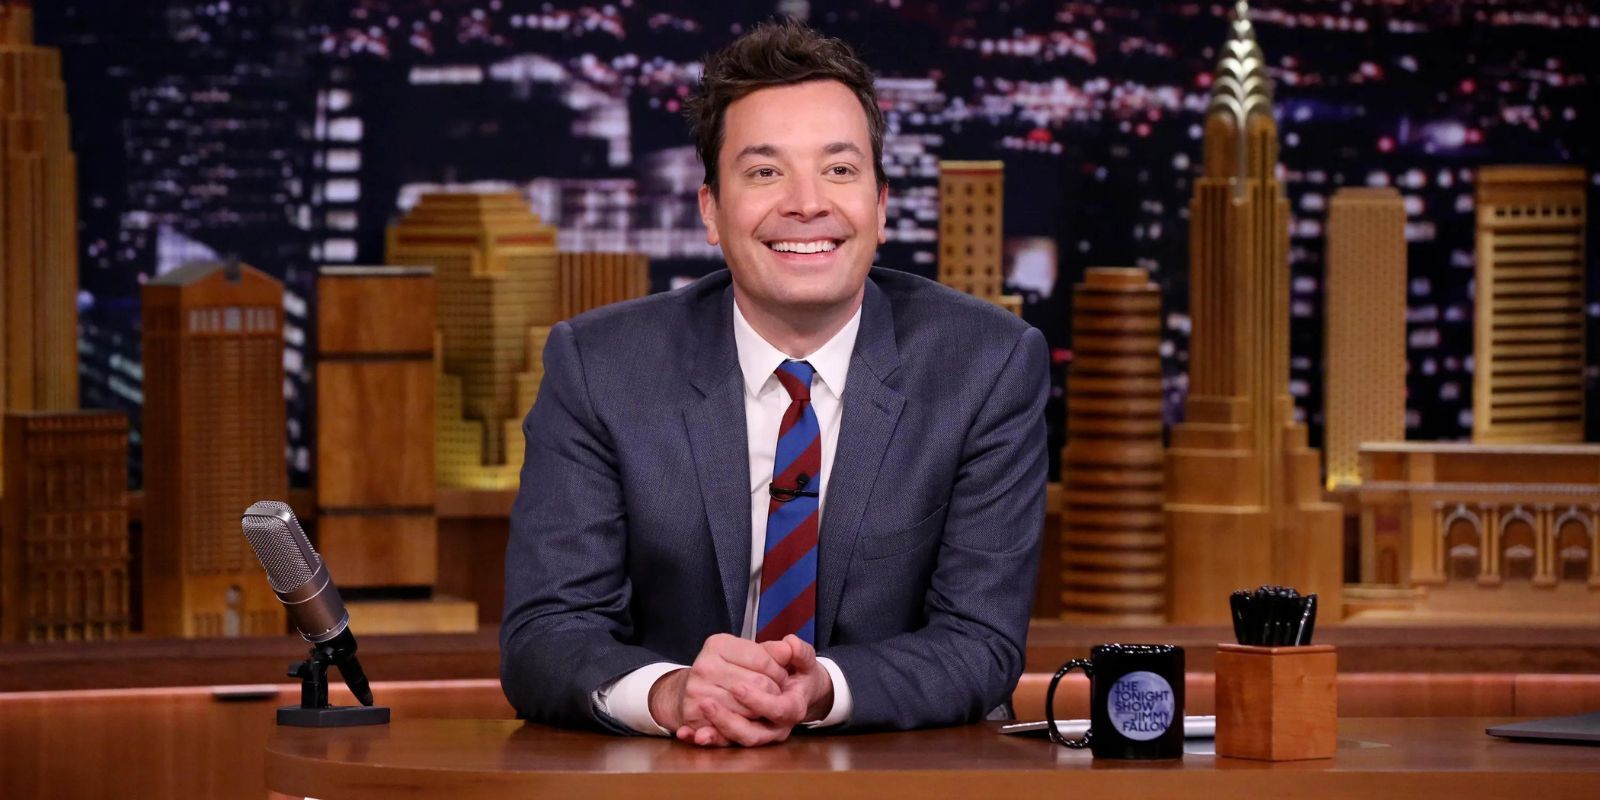 Jimmy Fallon sitting at his desk, smiling with his hands folded